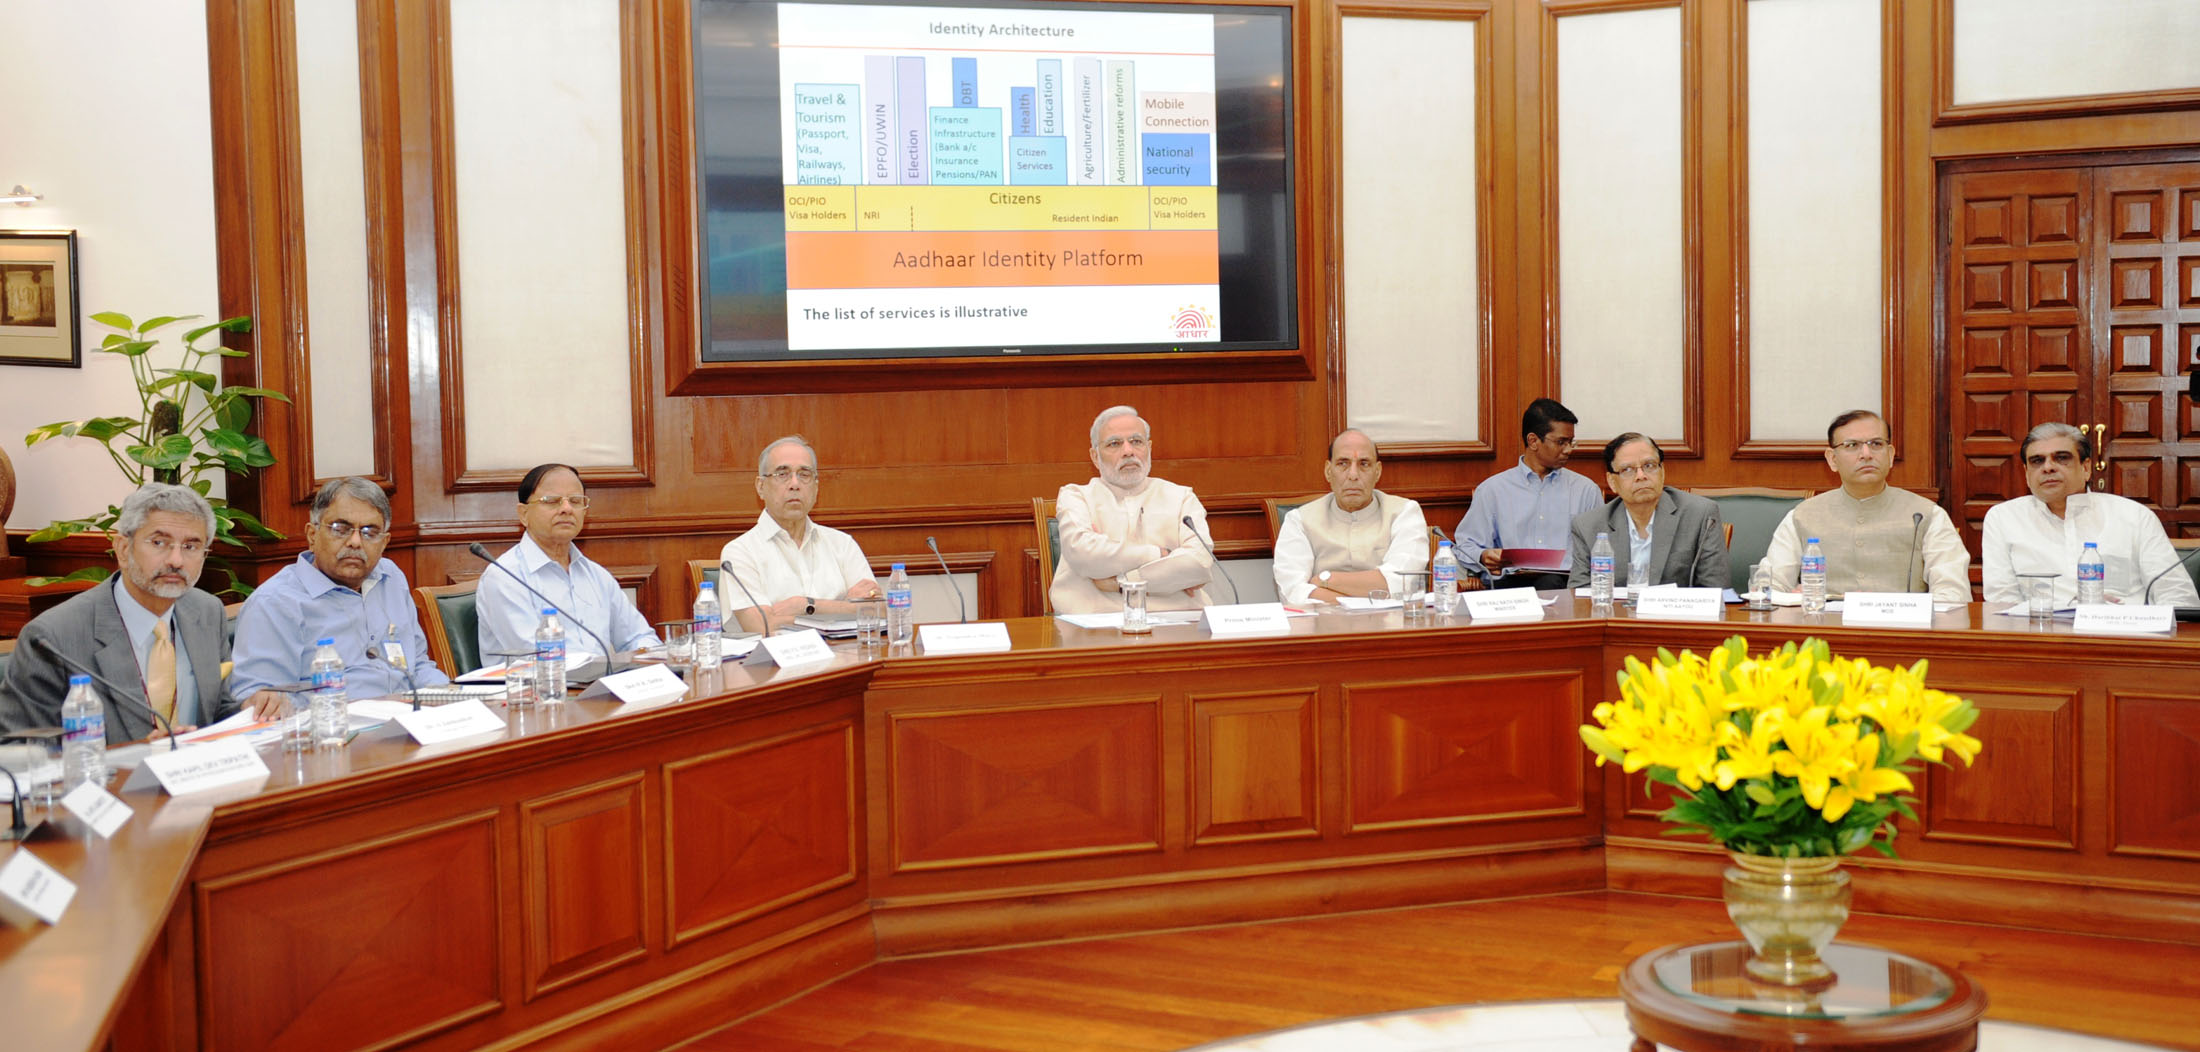 The Prime Minister, Shri Narendra Modi chairing a high-level meeting to review the progress of UID and DBT, in New Delhi on June 18, 2015.